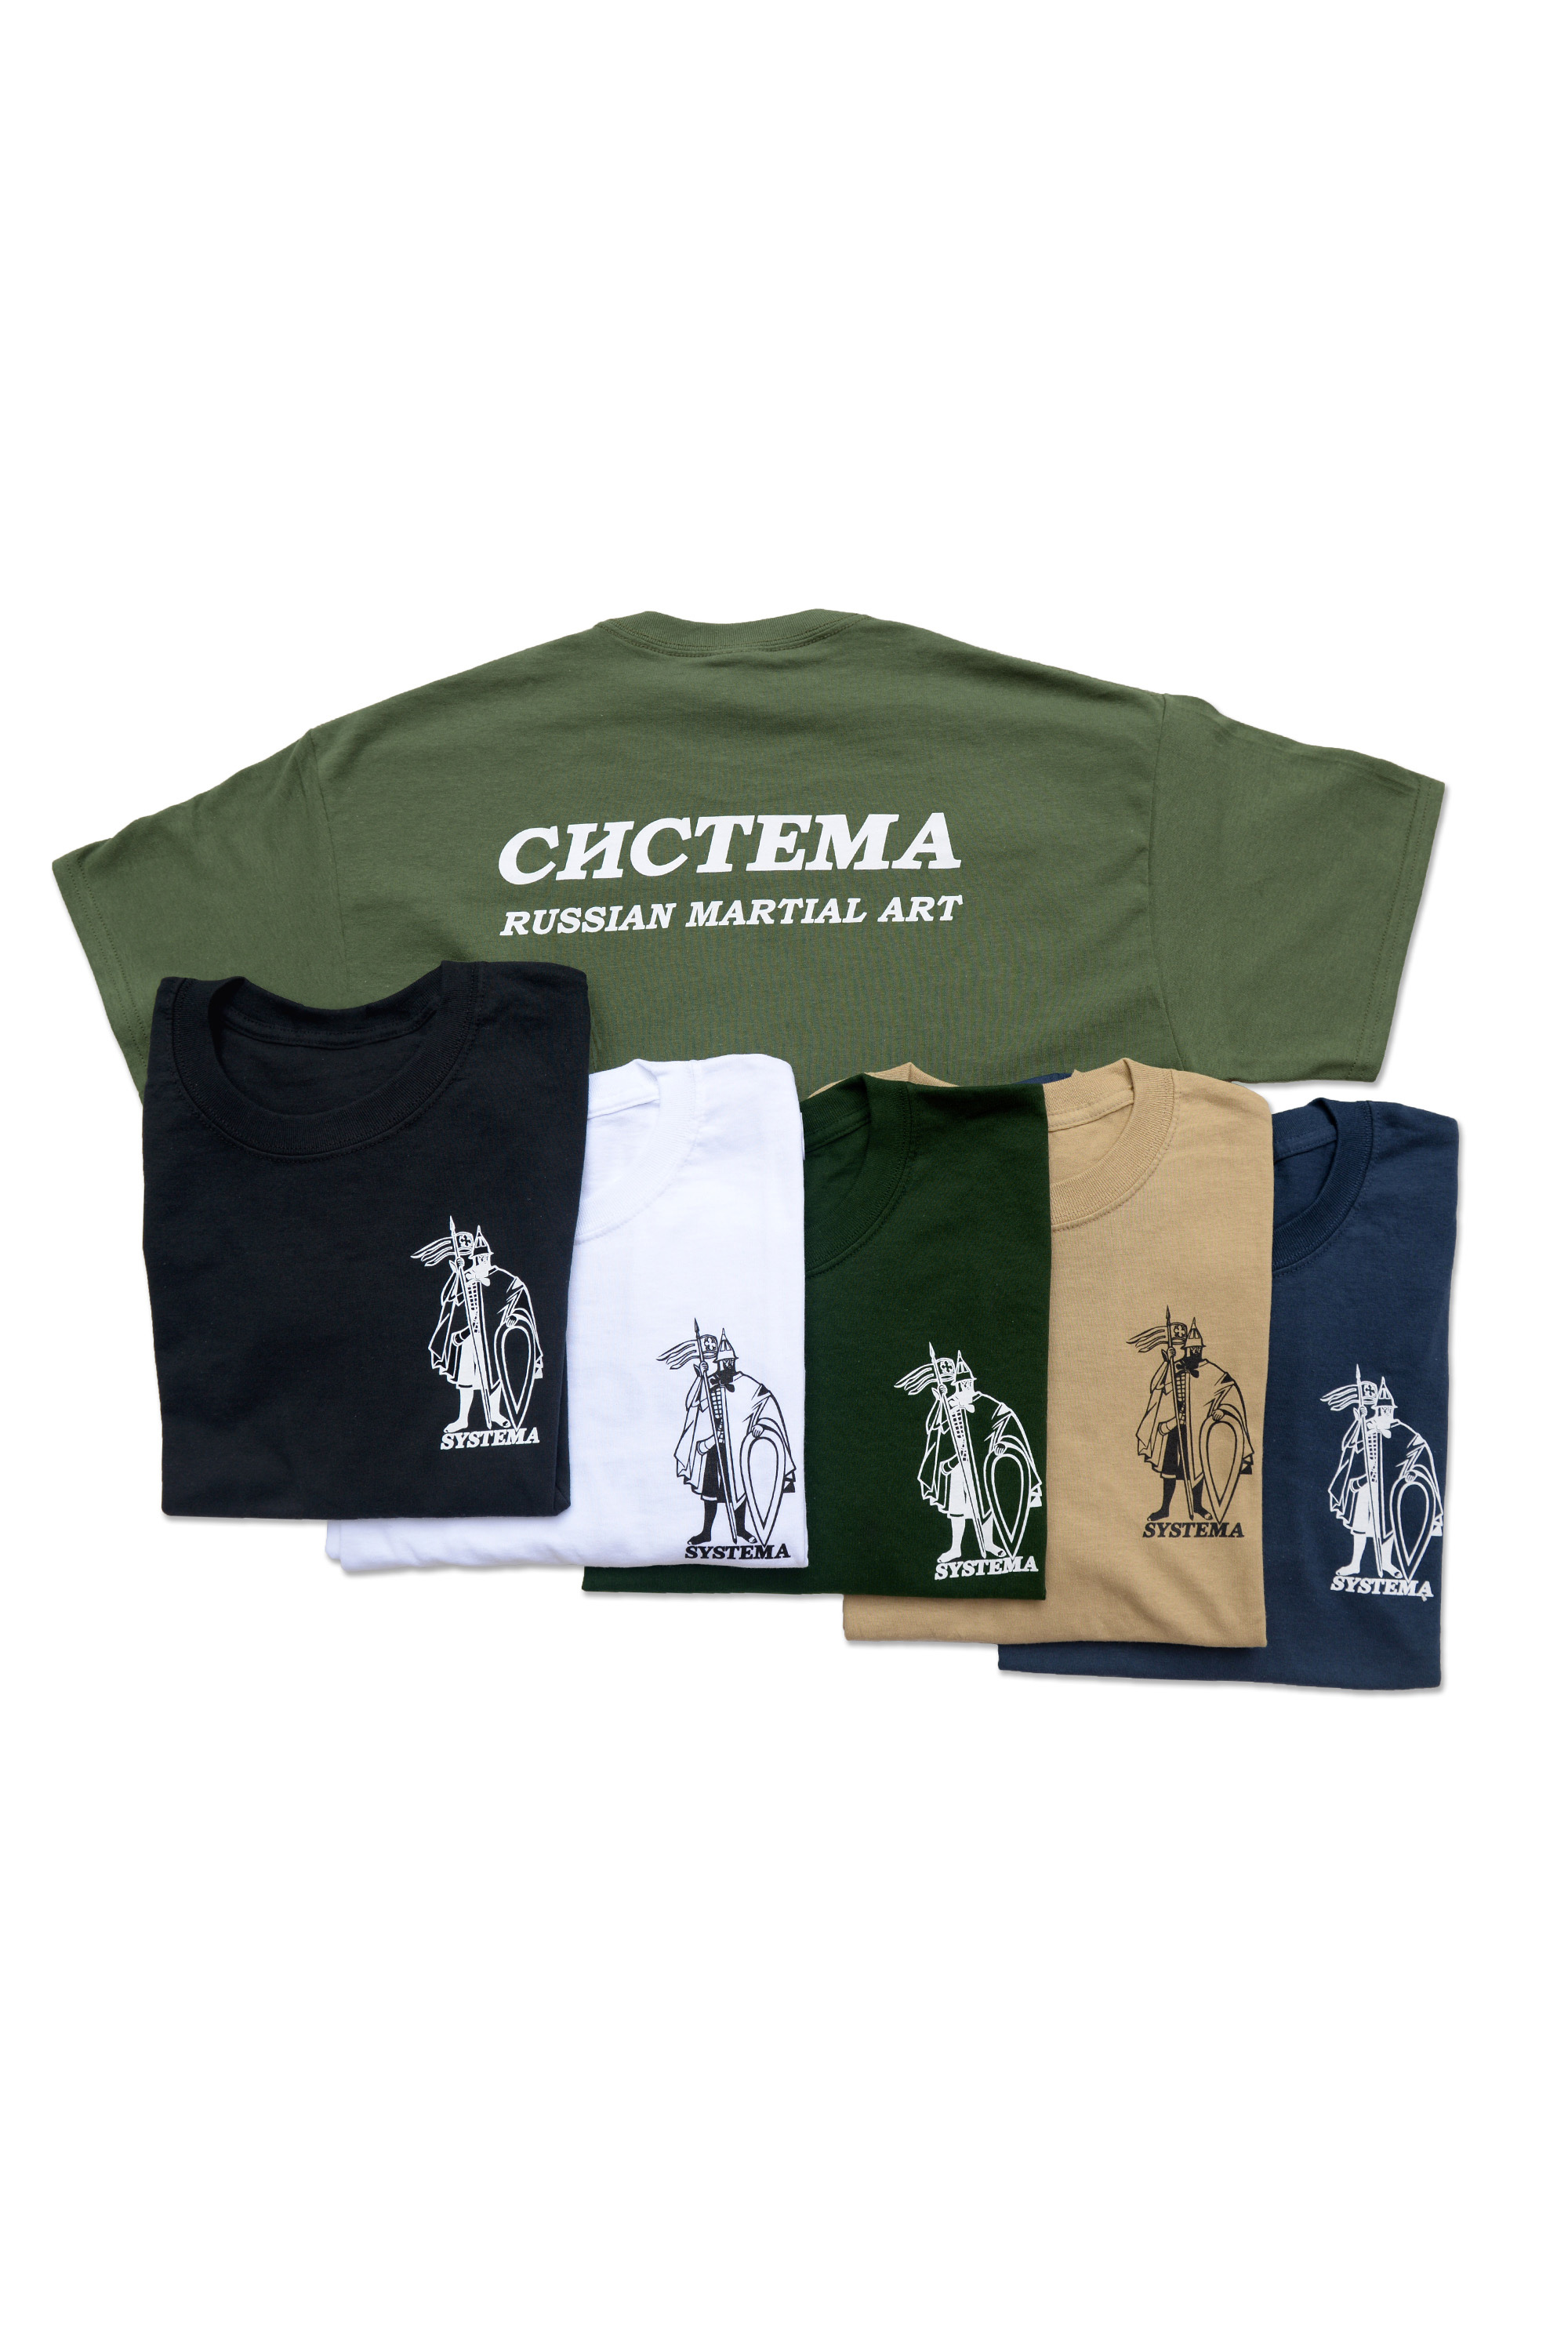 The Official Systema T-Shirt